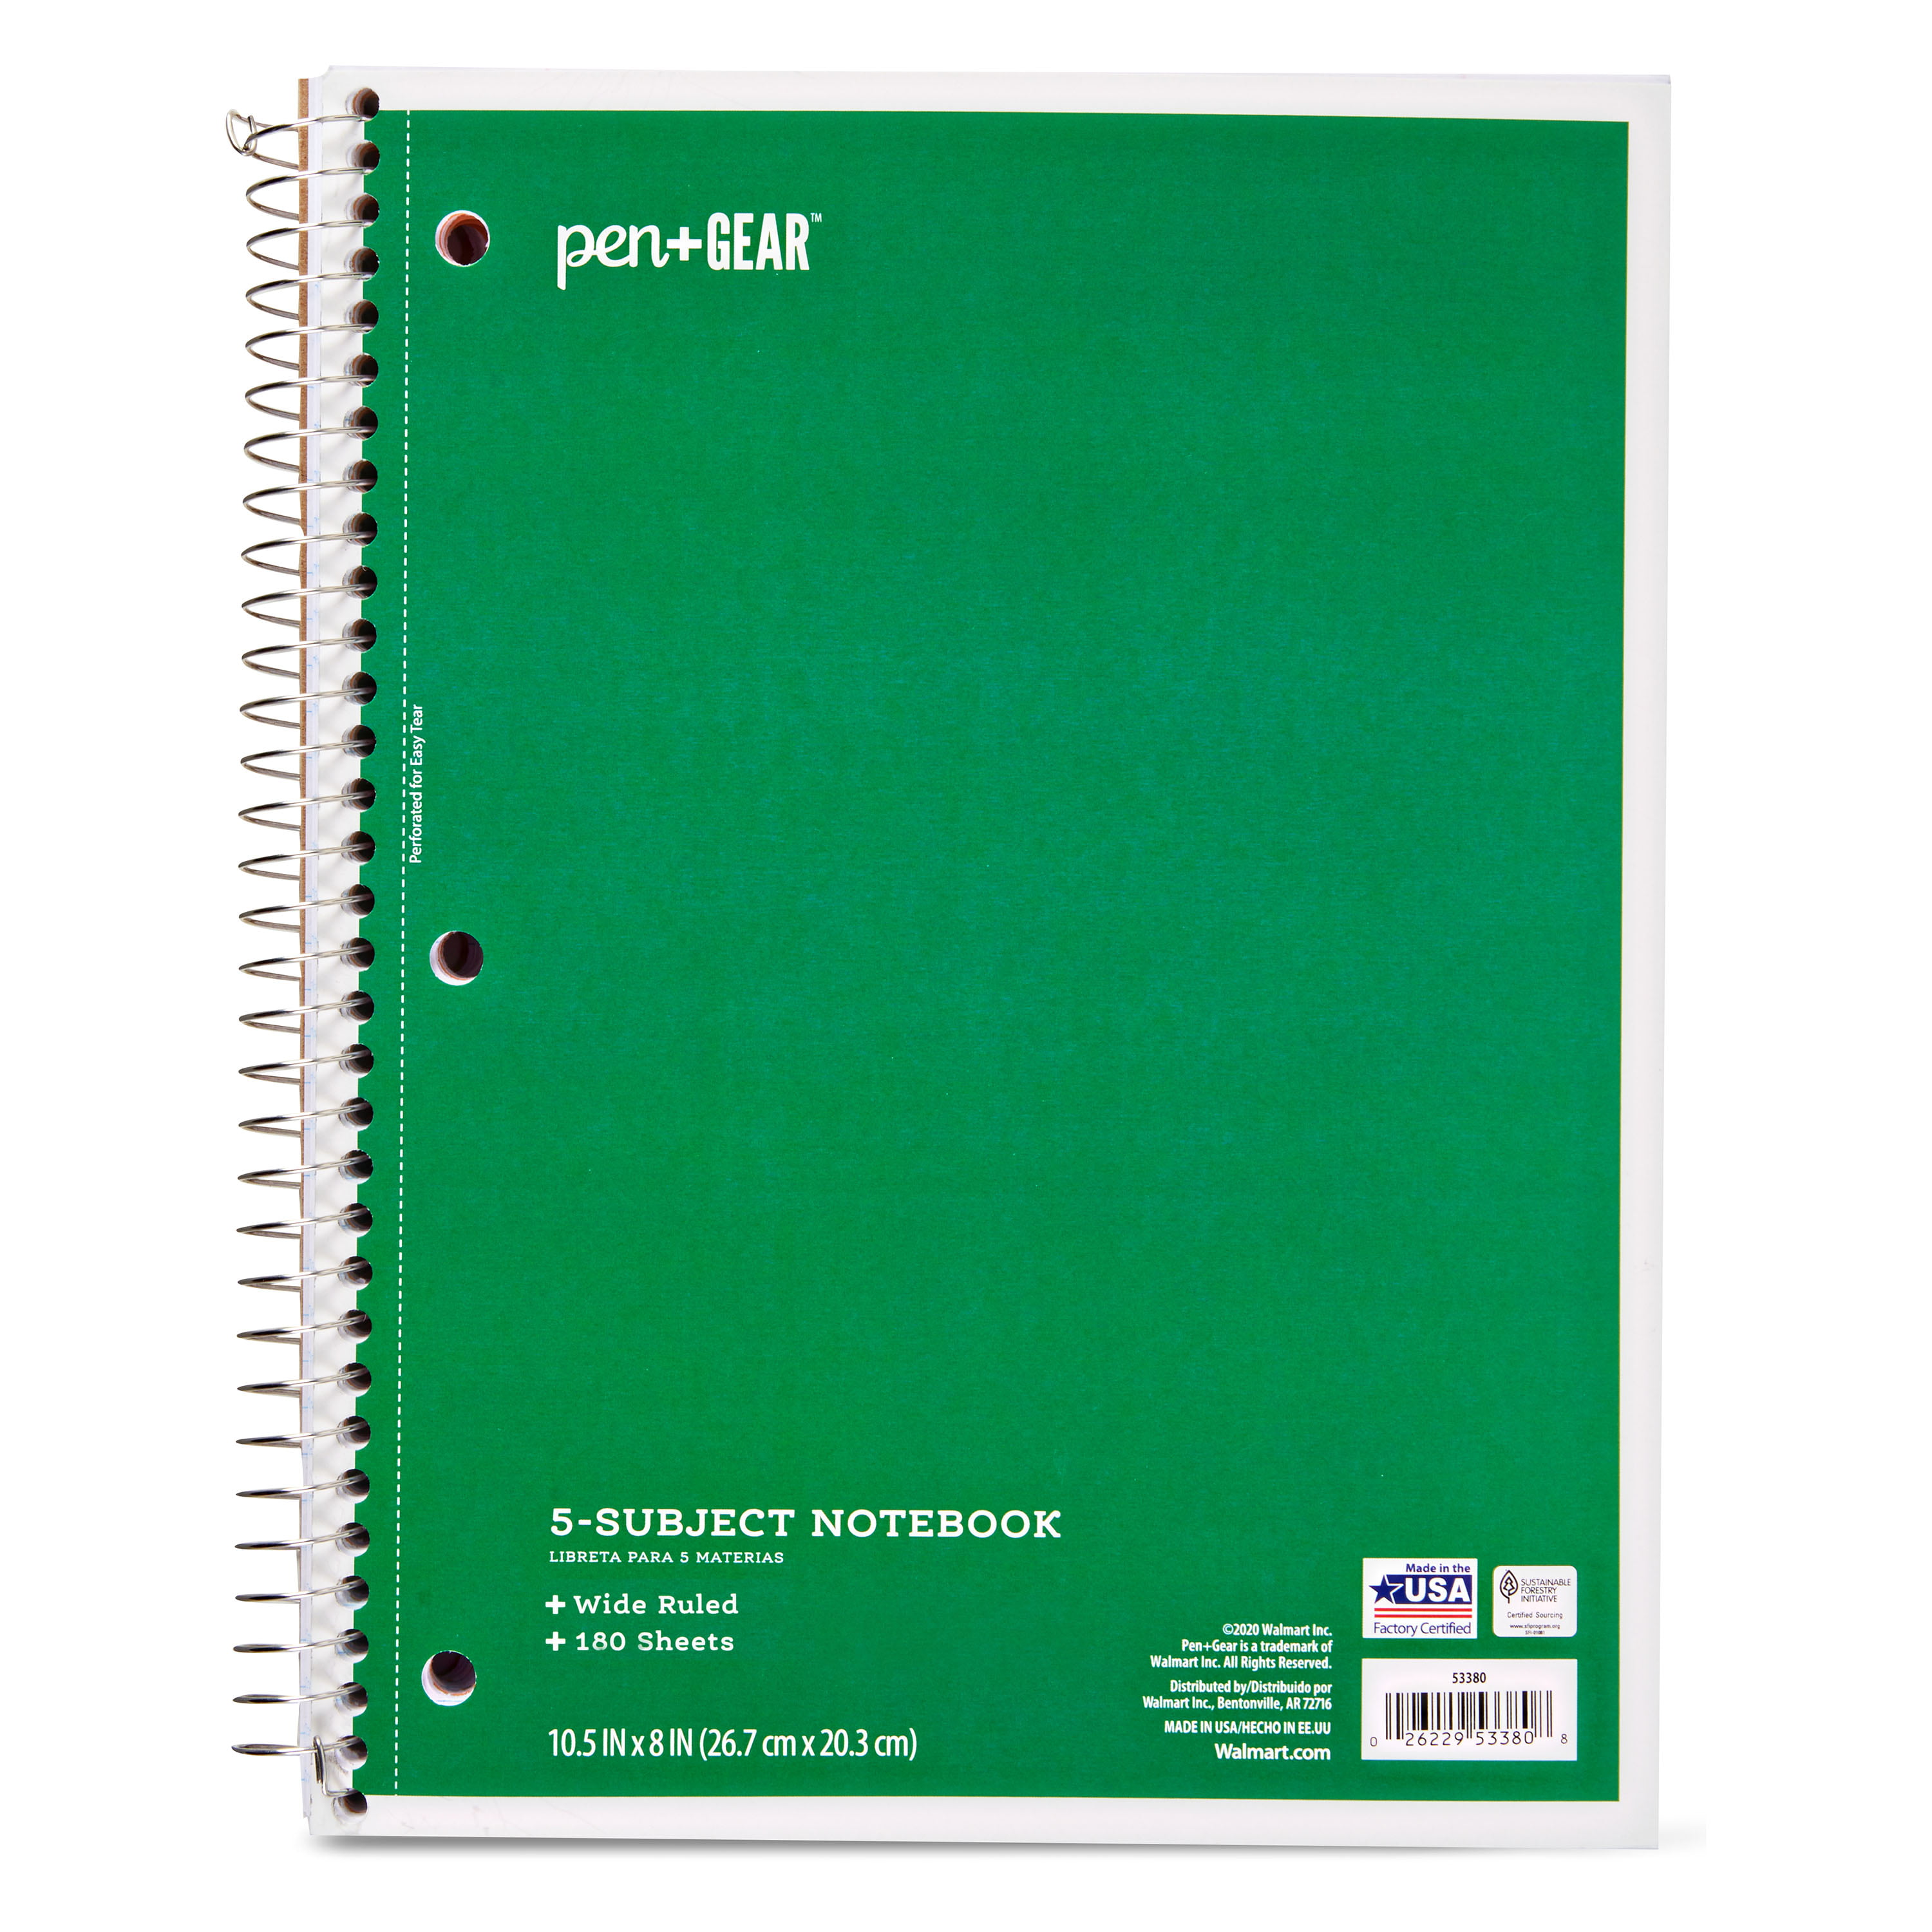 1-Subject Spiral Notebook FREE SHIPPING 70 Ct 24 iSCHOLAR COLLEGE RULE r-1 